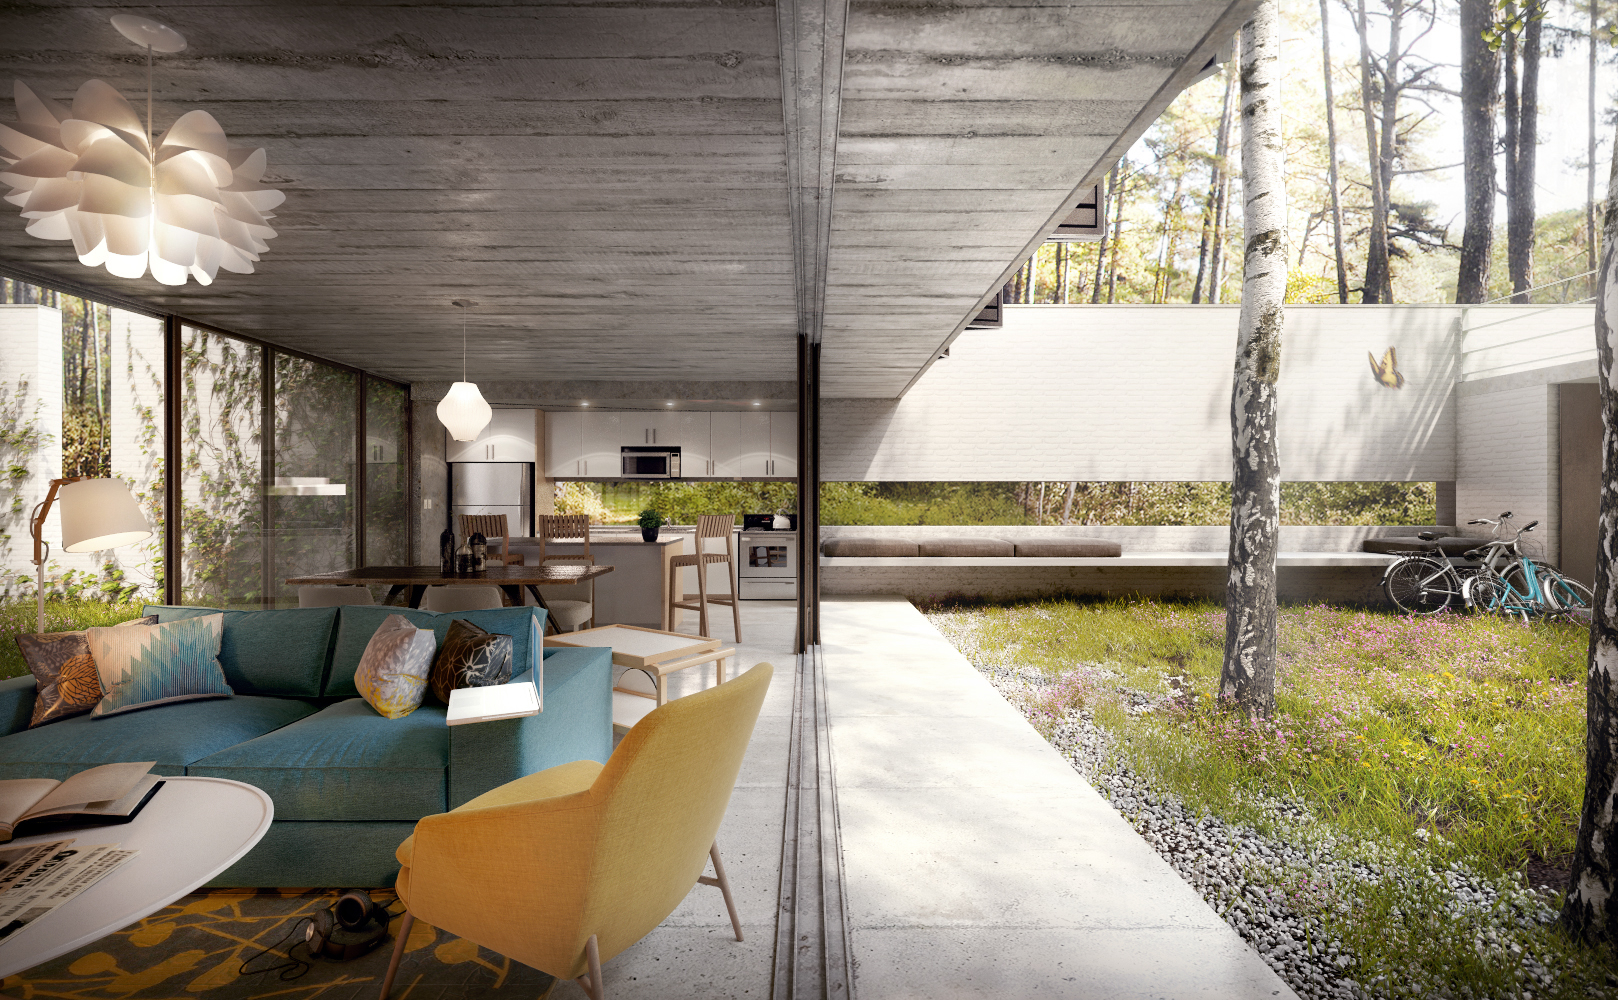 “Open space | House in the woods” – ACastagnet | 3D Galerie "Picture of